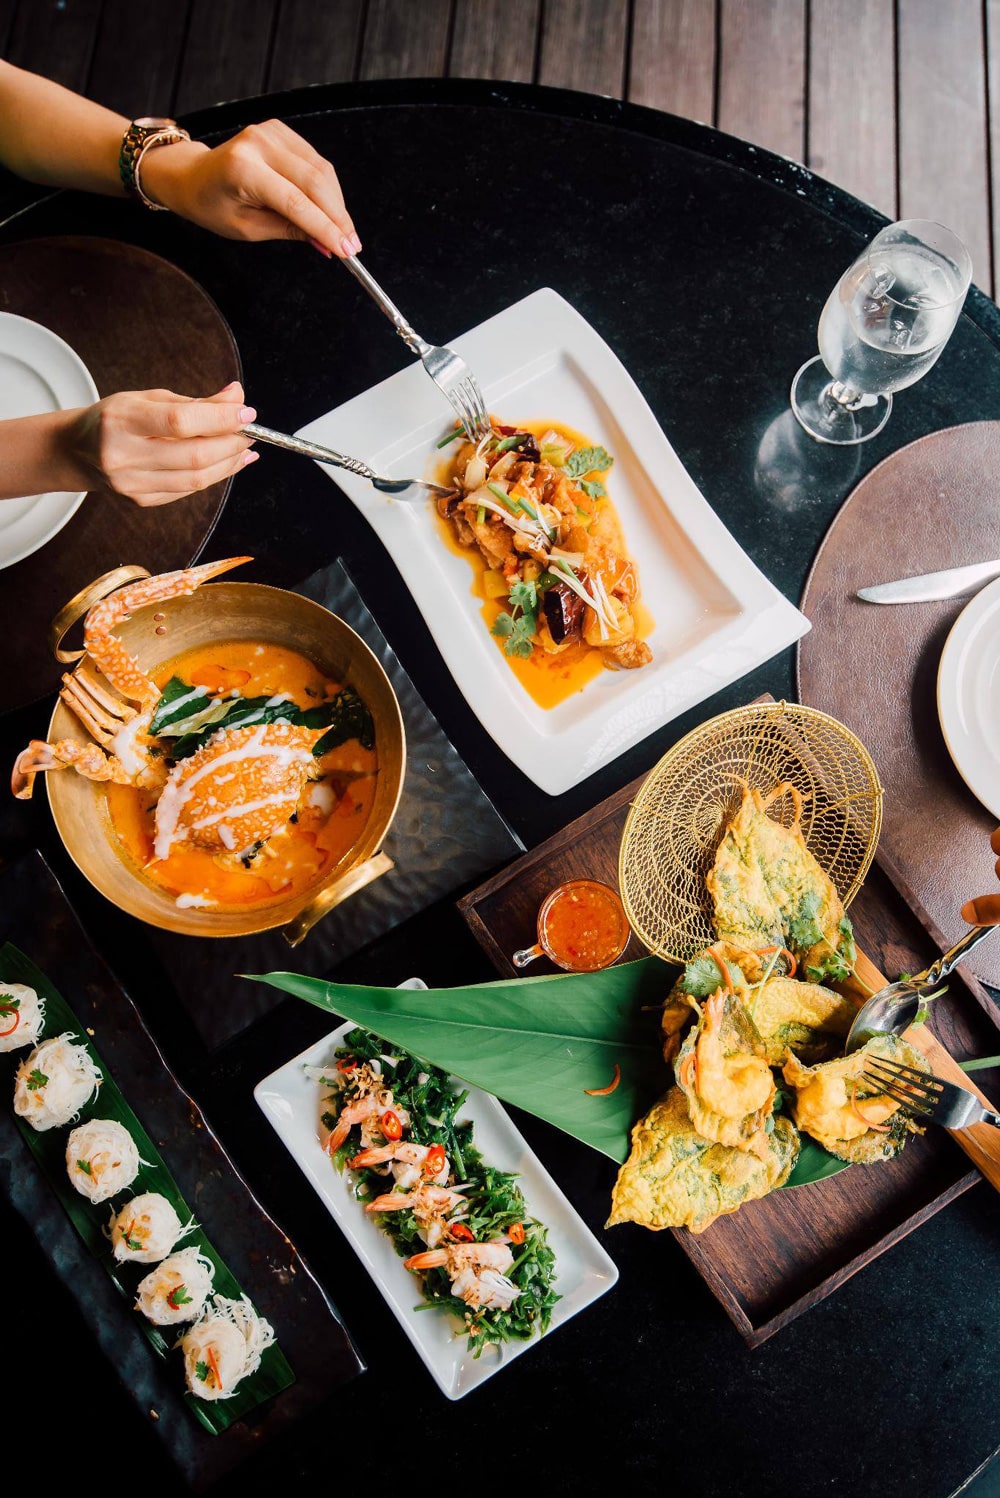 Feast away on tasty Thai cuisine at La Sala, the on-site restaurant. It’s recognized by the Michelin Guide!